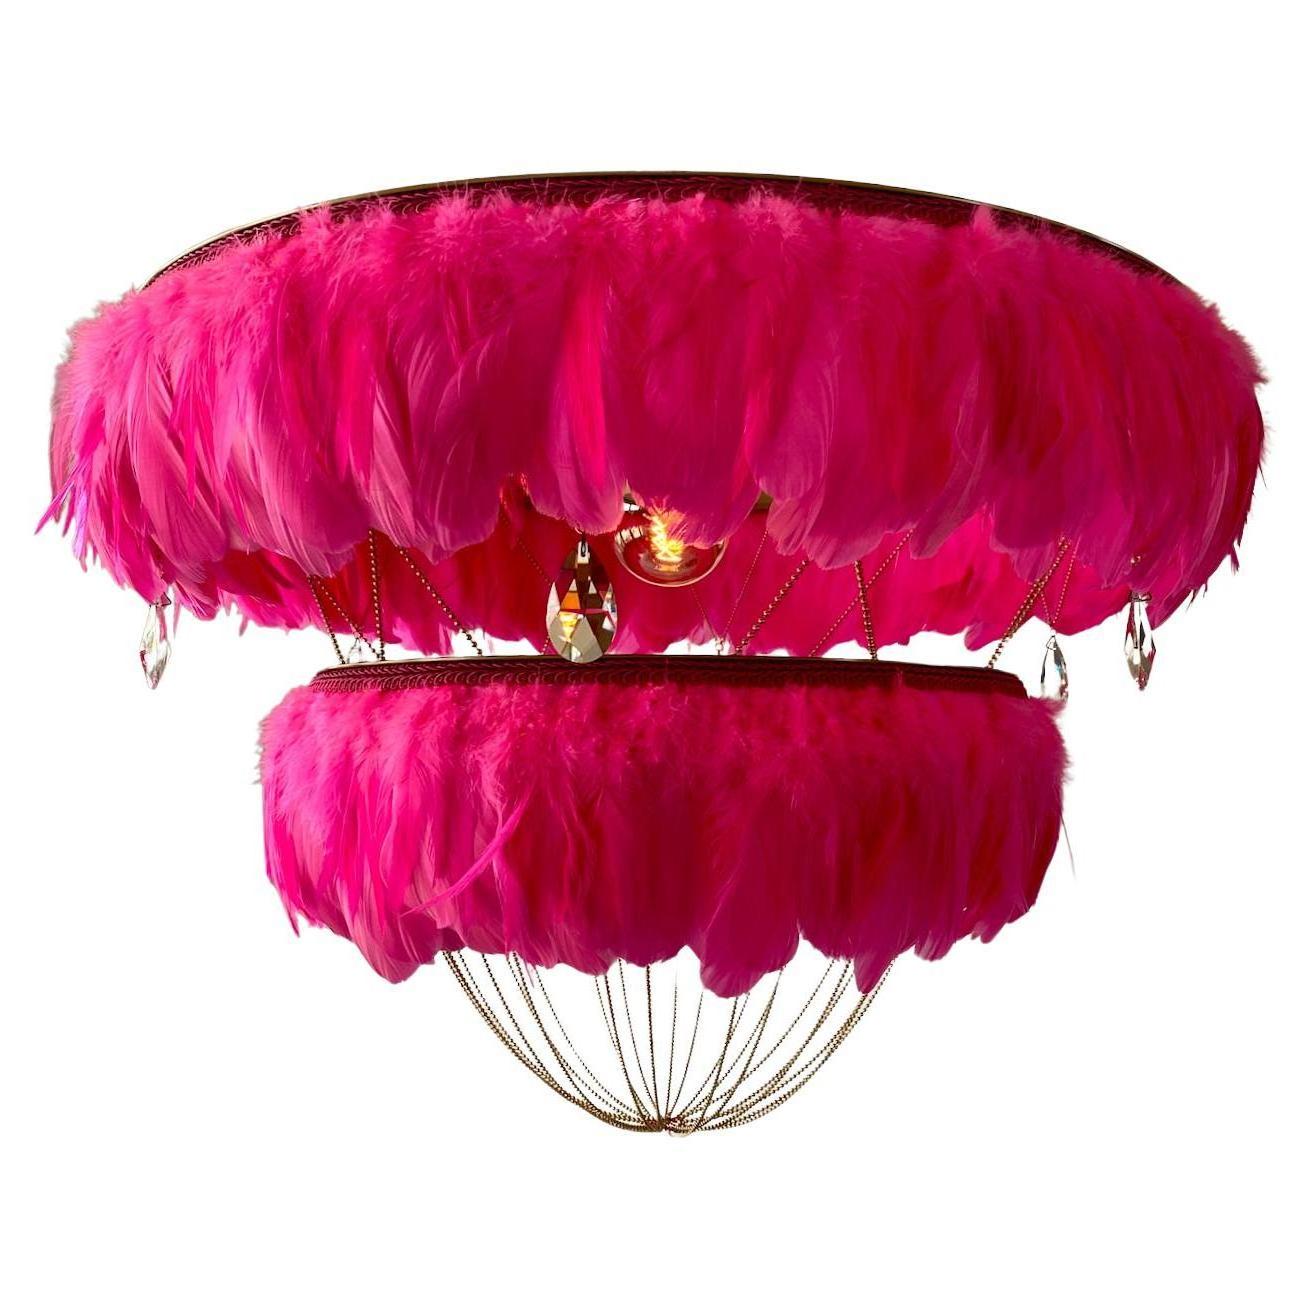 Dyed Feather Chandelier in Shocking Pink - Bertie -  Hand Made to order in London.  For Sale